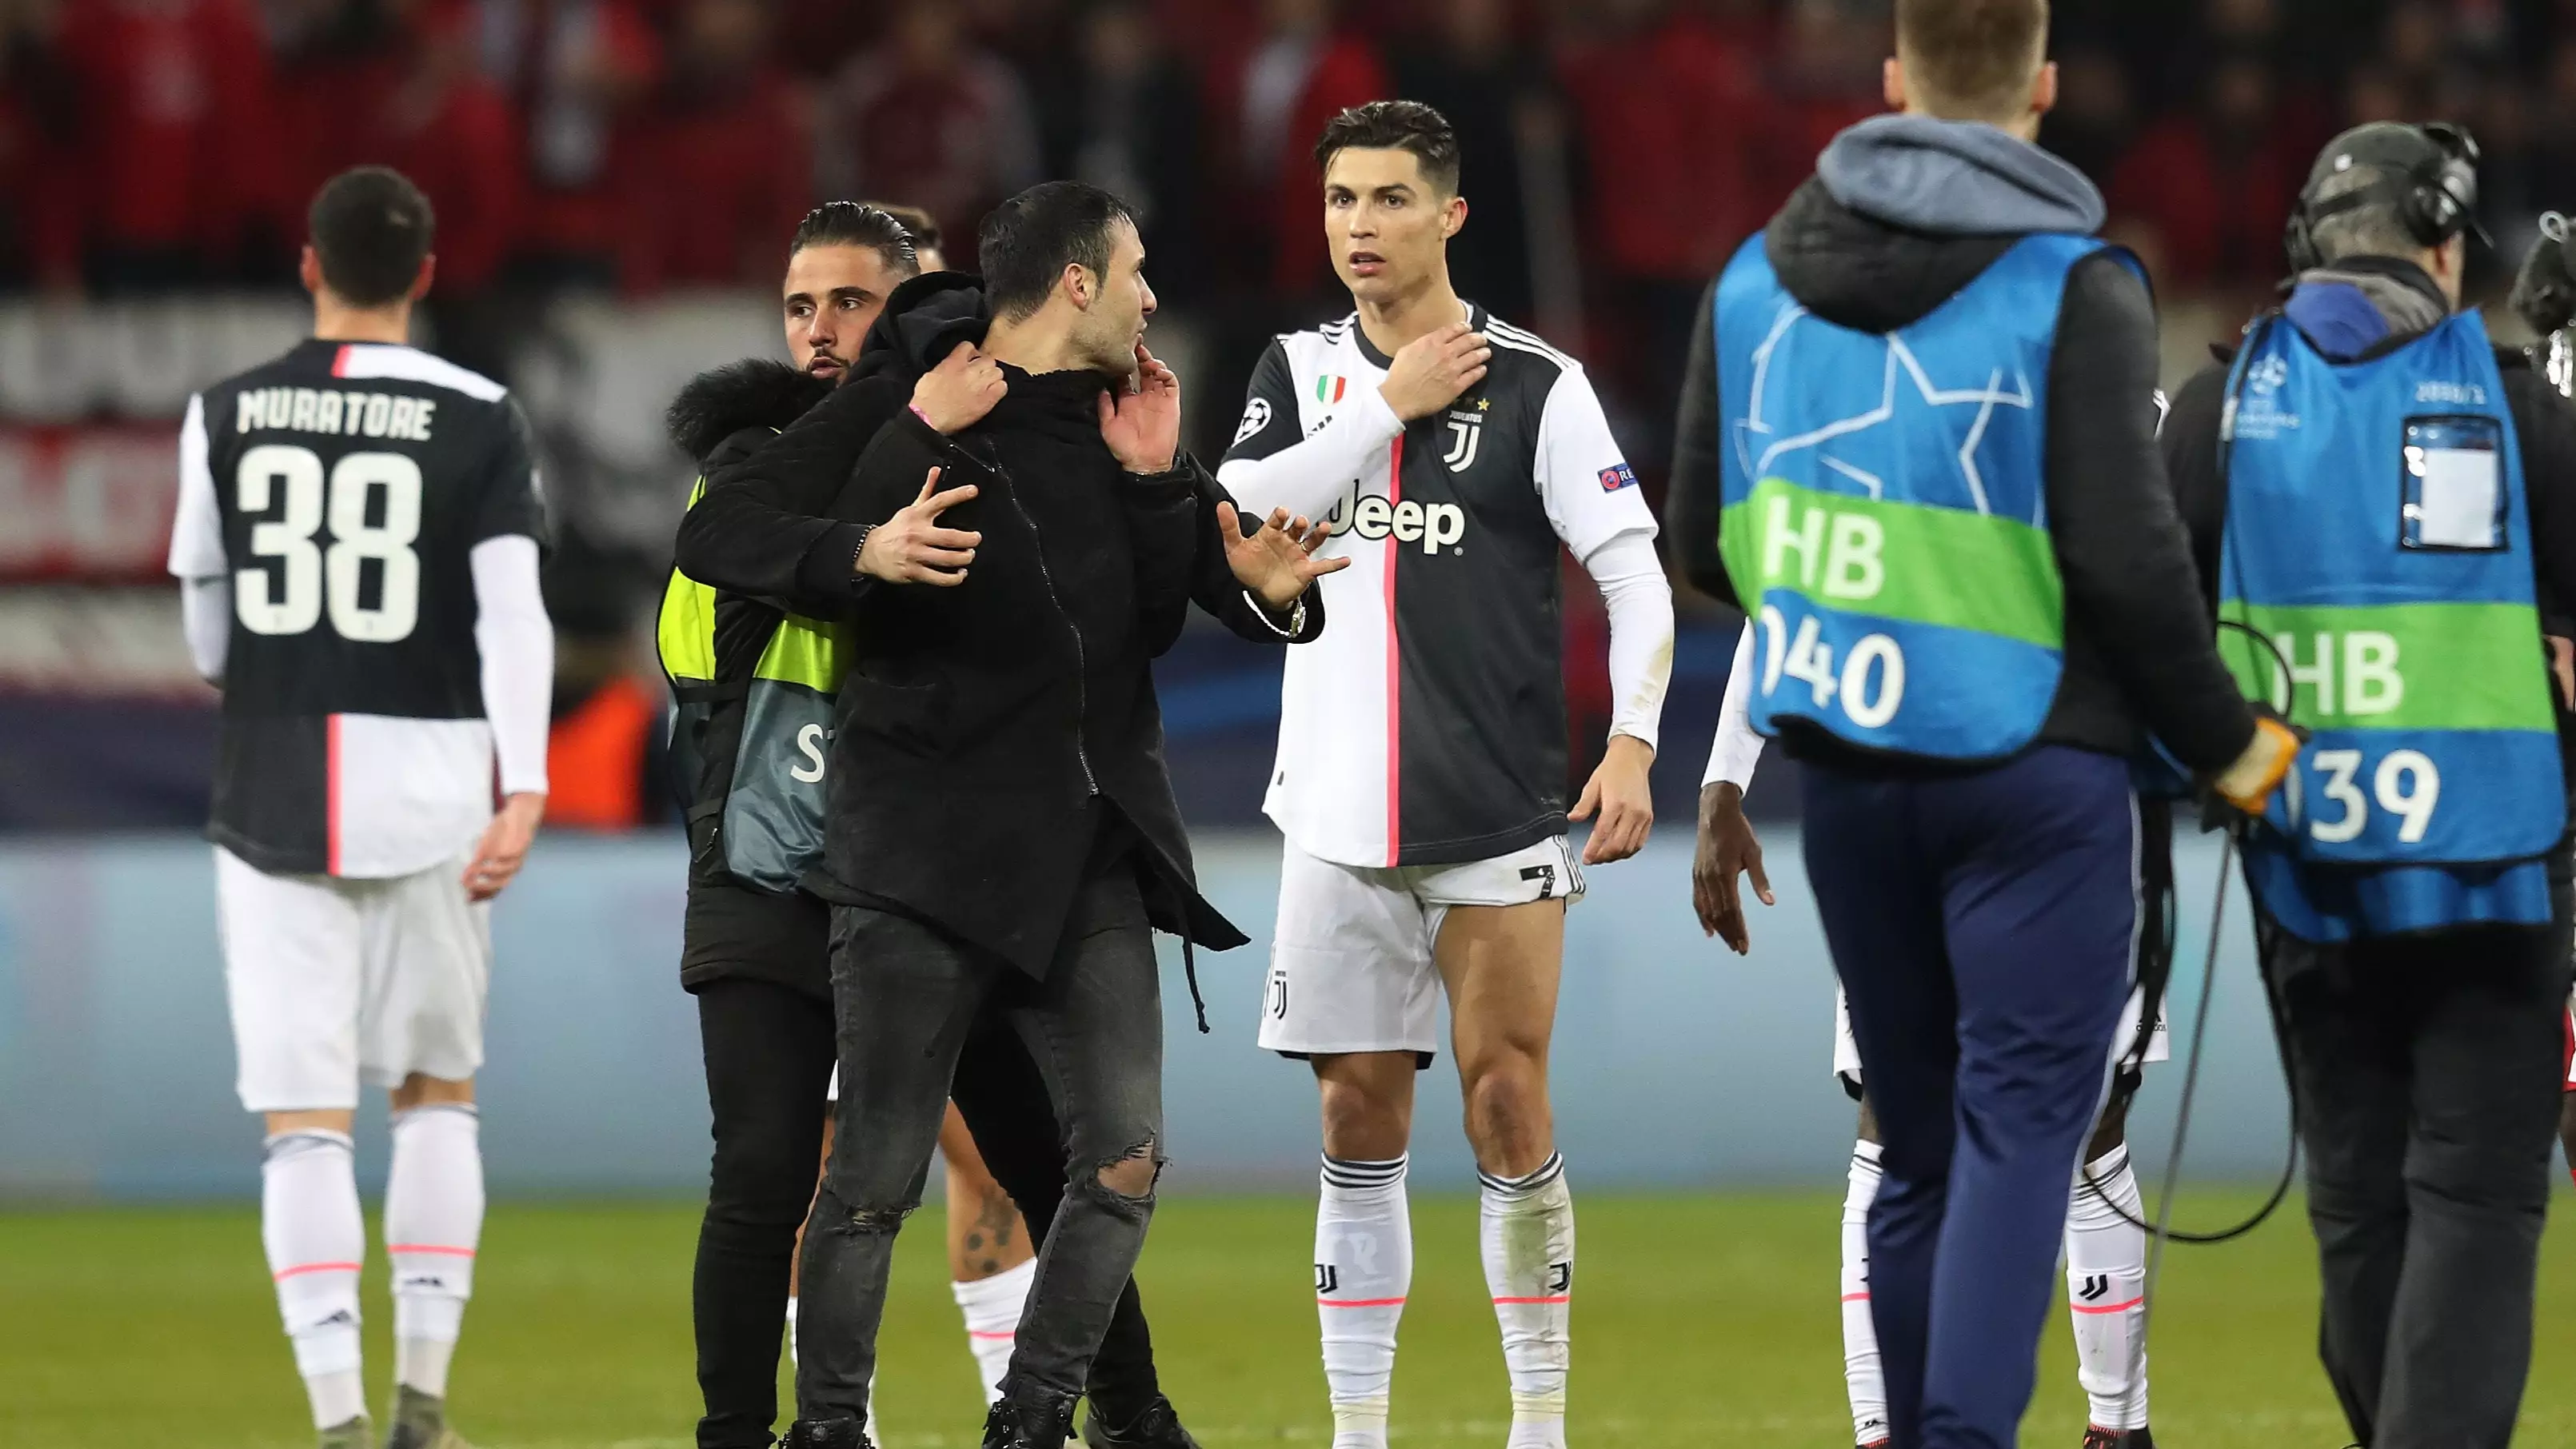 Cristiano Ronaldo Goes Absolutely Ballistic After Pitch Invader Grabs Him By The Neck